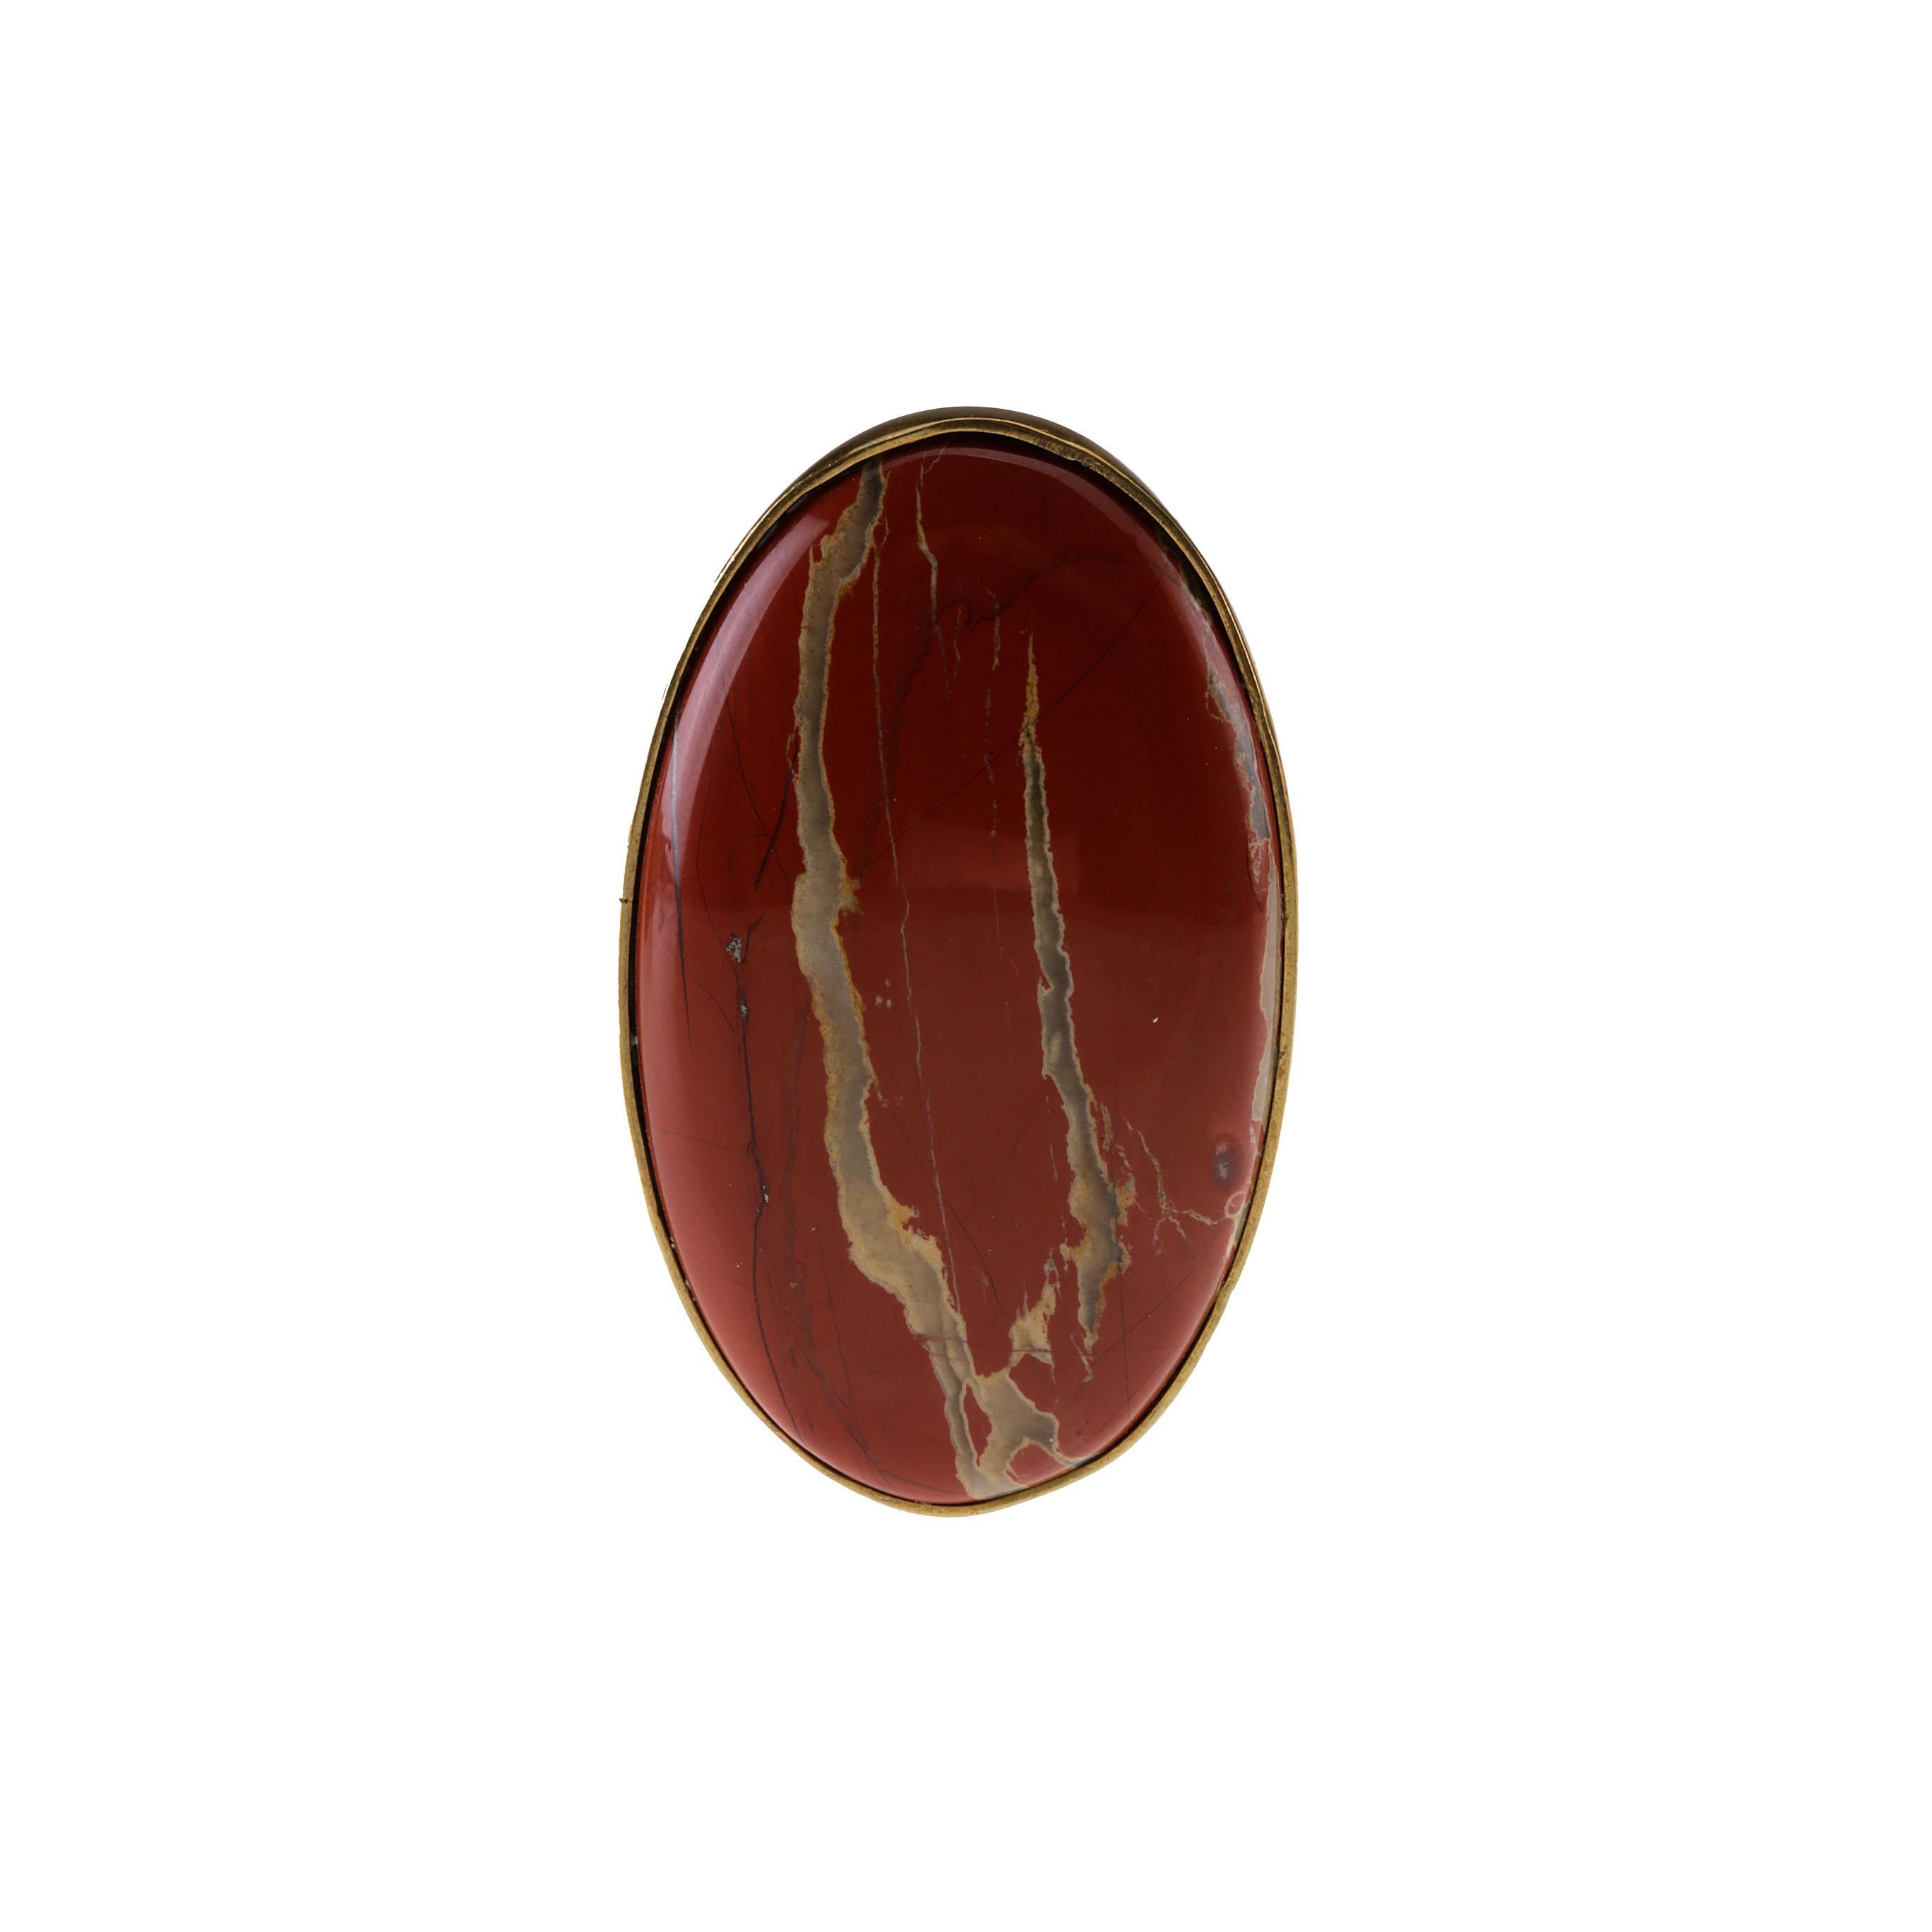 Bronze jasper big ring size 13 eu.
All Giulia Colussi jewelry is new and has never been previously owned or worn. Each item will arrive at your door beautifully gift wrapped in our boxes, put inside an elegant pouch or jewel box.
